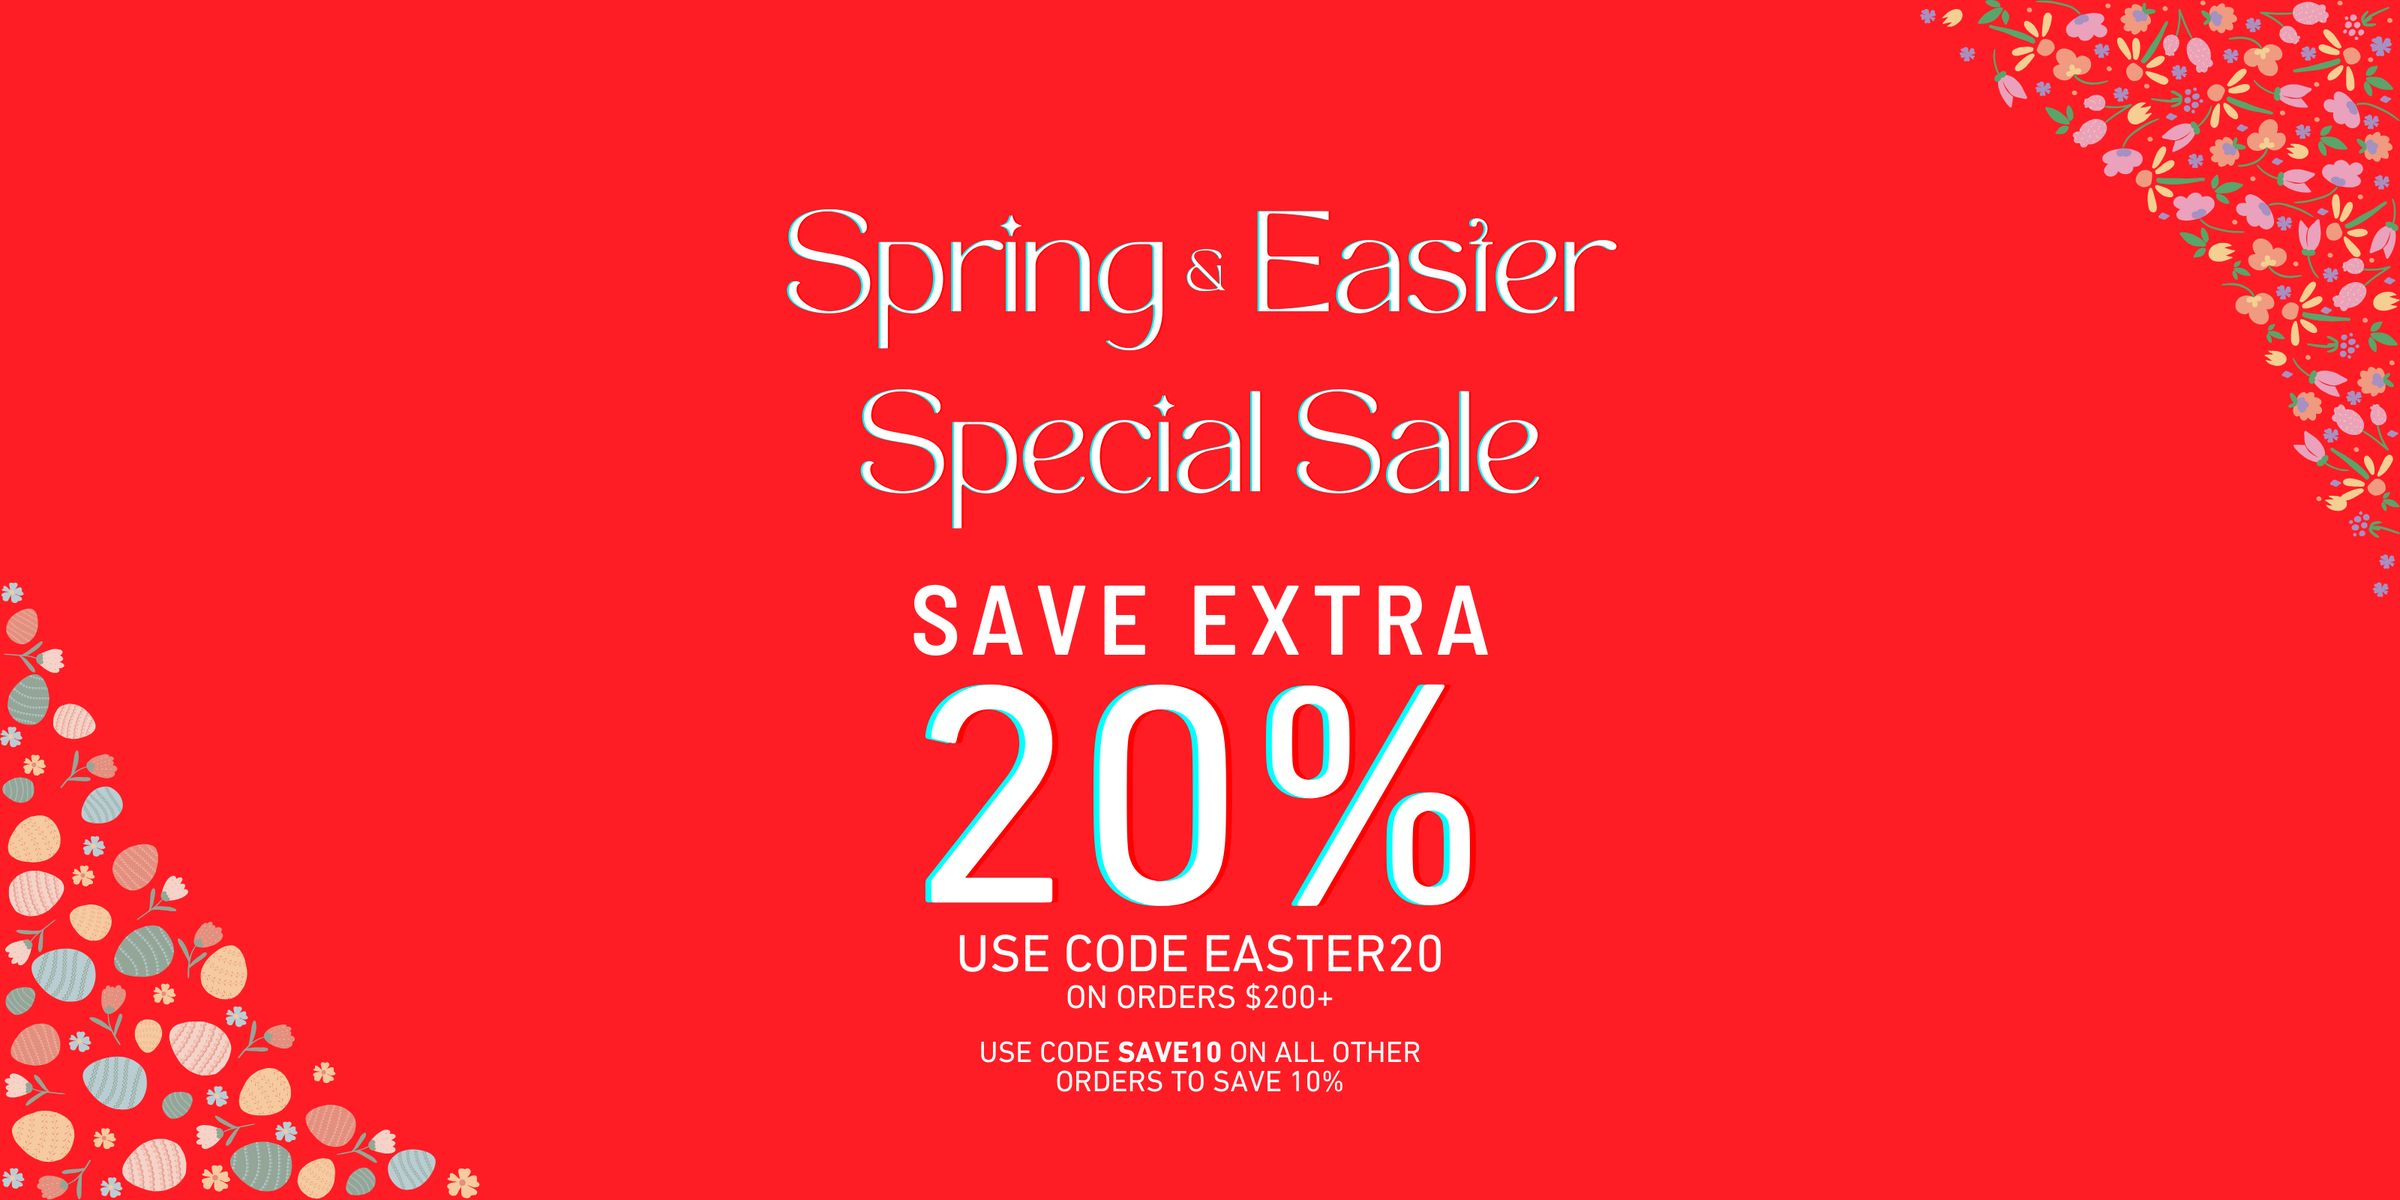 Spring & Easter Special, Save Extra 20% Off Use Code EASTER20 On Orders Over $200, or Use Code Save10 On All Other Orders To Save 10%